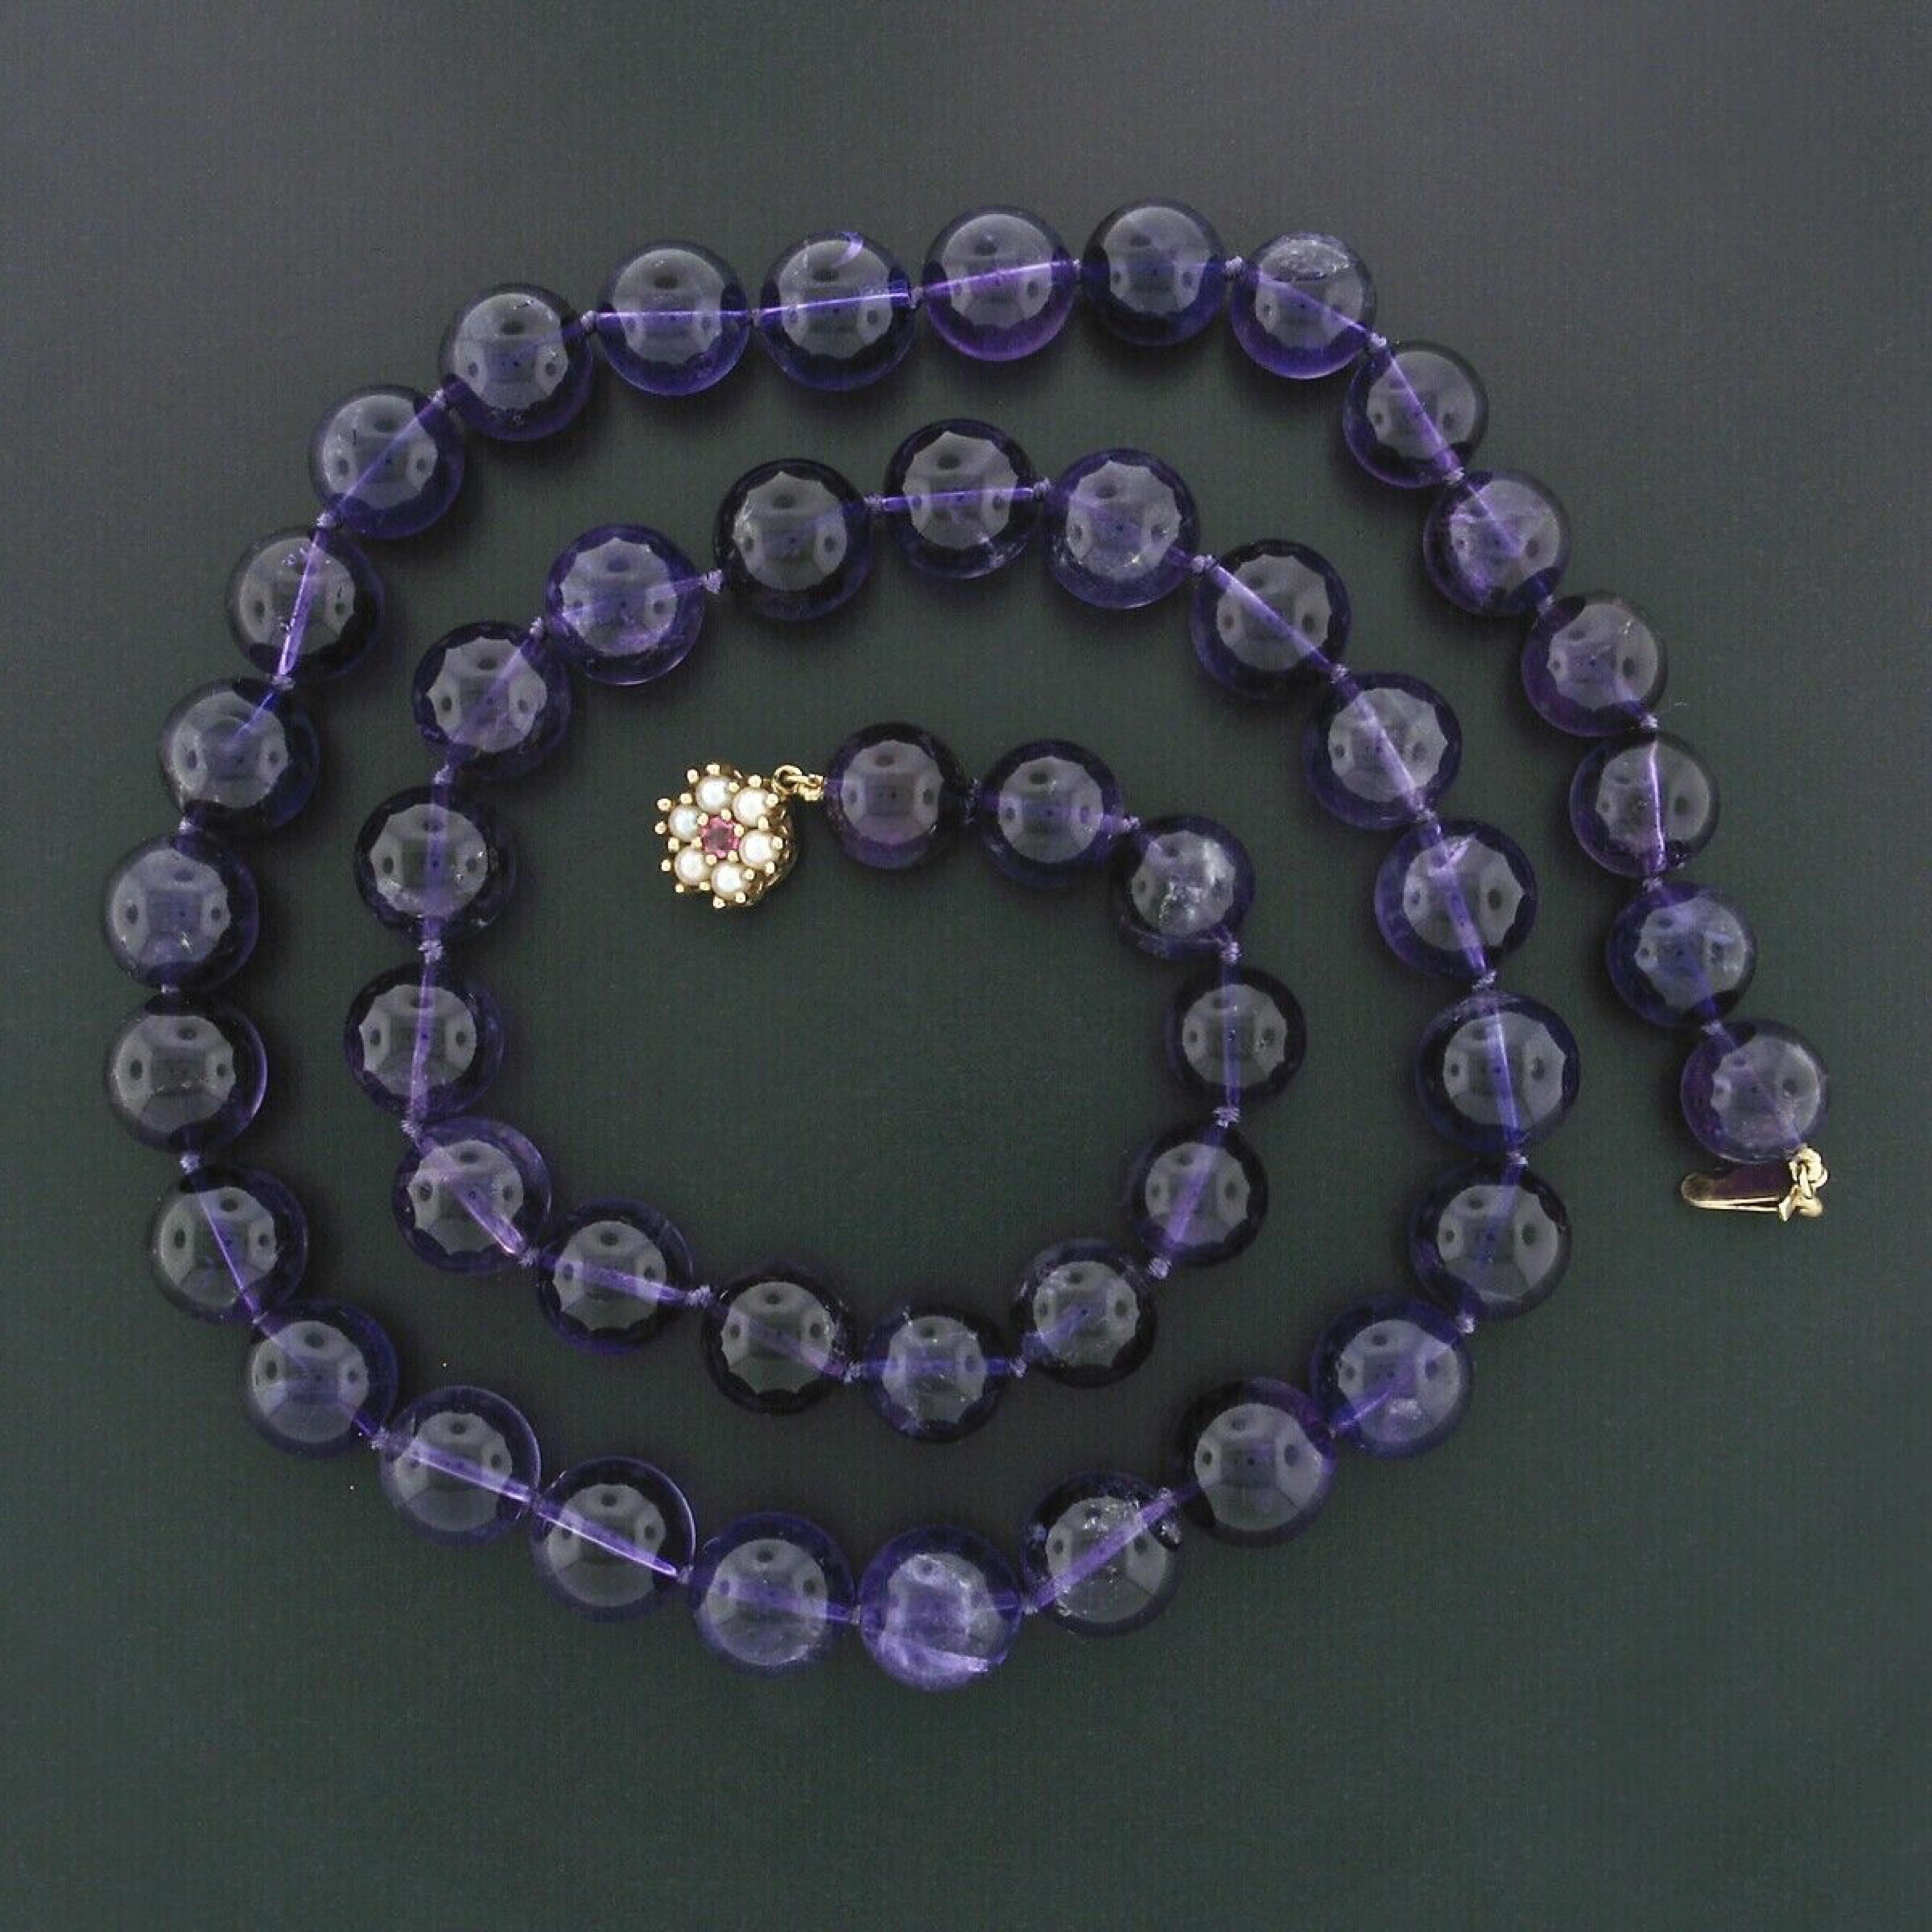 This unique and very fine vintage statement necklace features 48 round bead, genuine and natural amethyst stones. The amethysts display very desirable and naturally varying shades of medium to rich and deep purple color. They are relatively large in